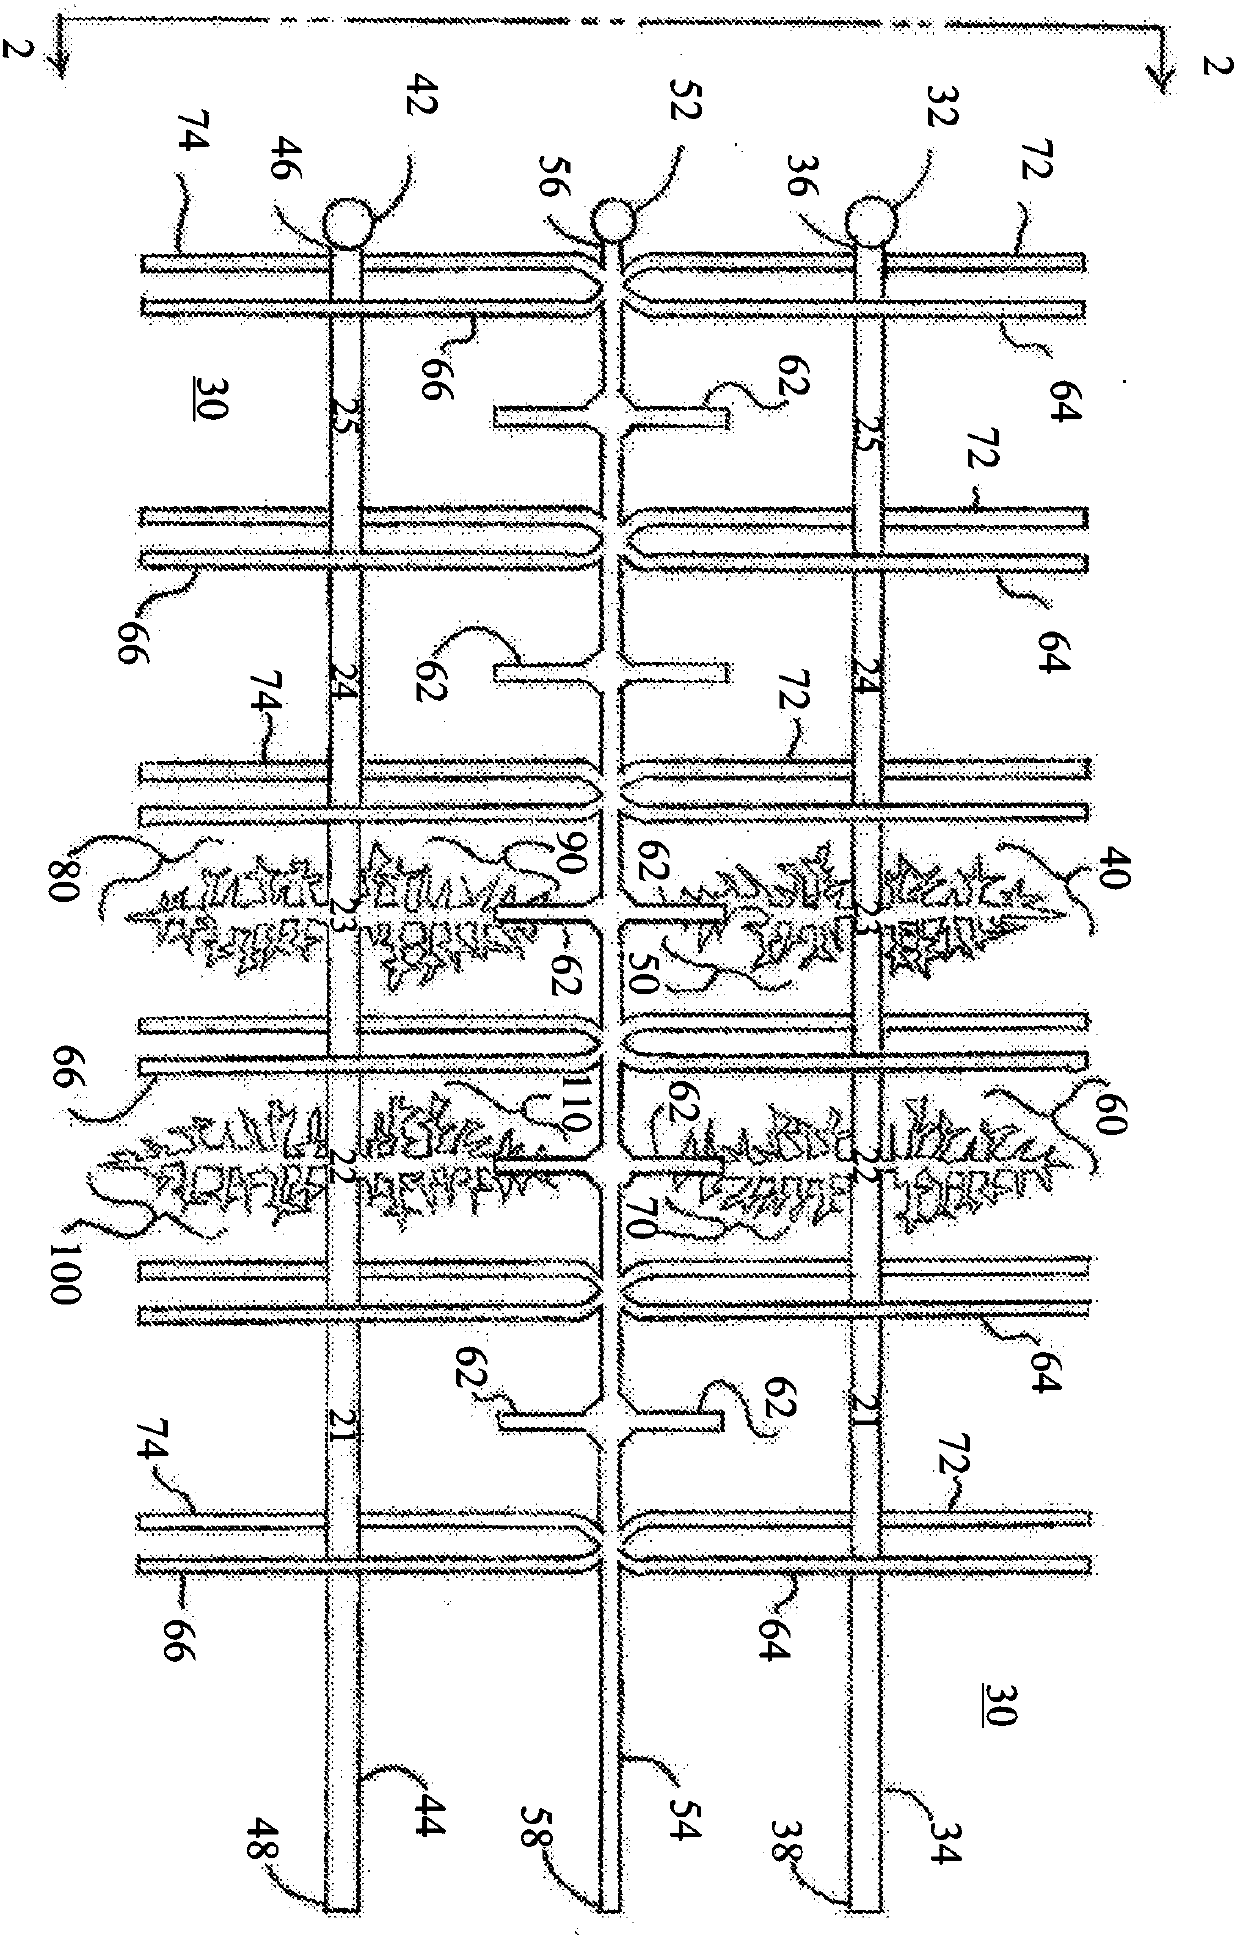 Methods and materials for evaluating and improving production of geo-specific shale reservoirs